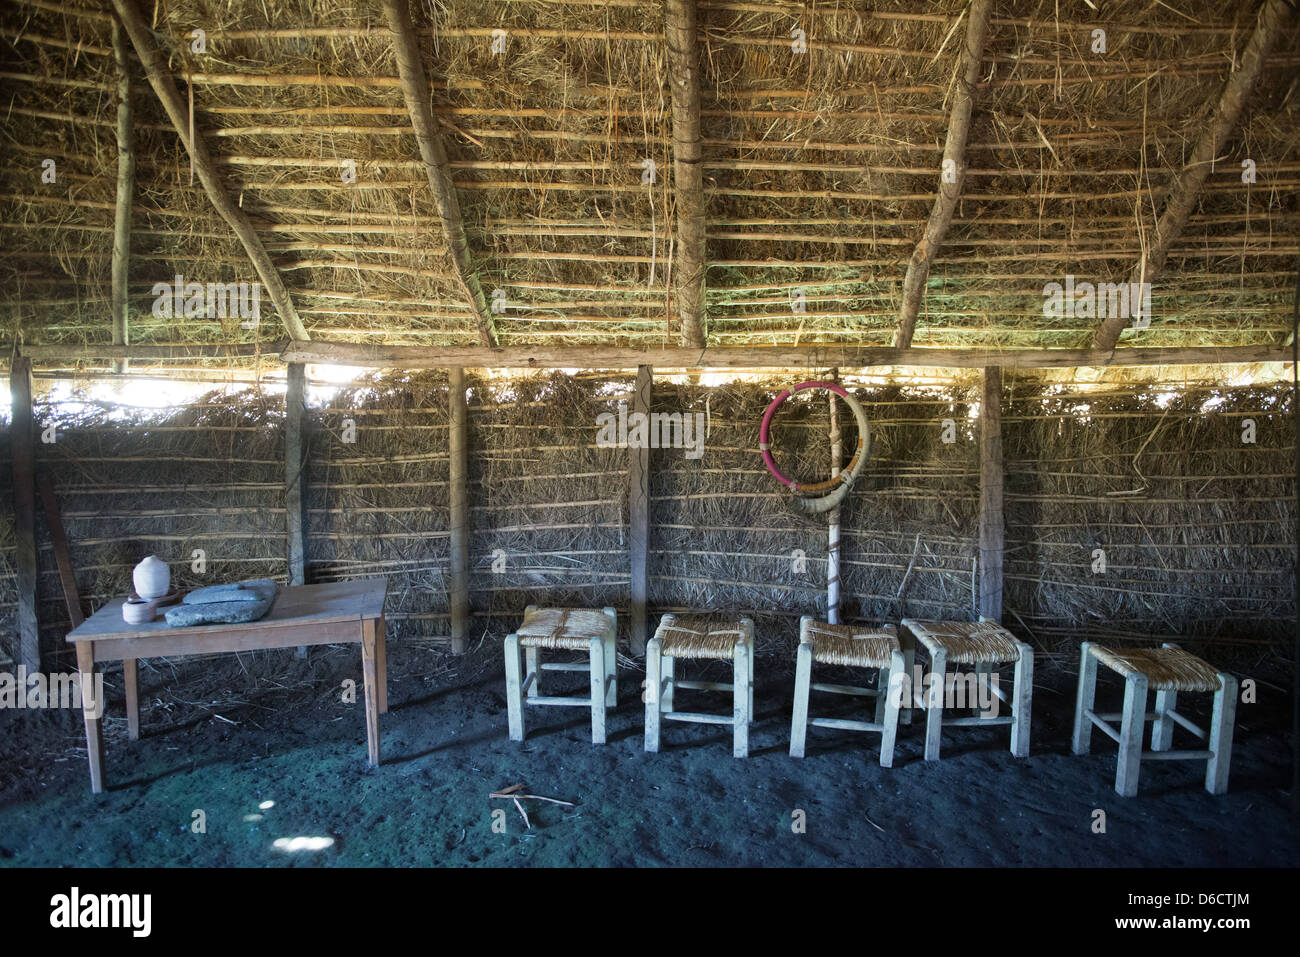 Stone wares inside a traditional South American thatched hut in a pasture on a farm east of Temuco in Chile Stock Photo